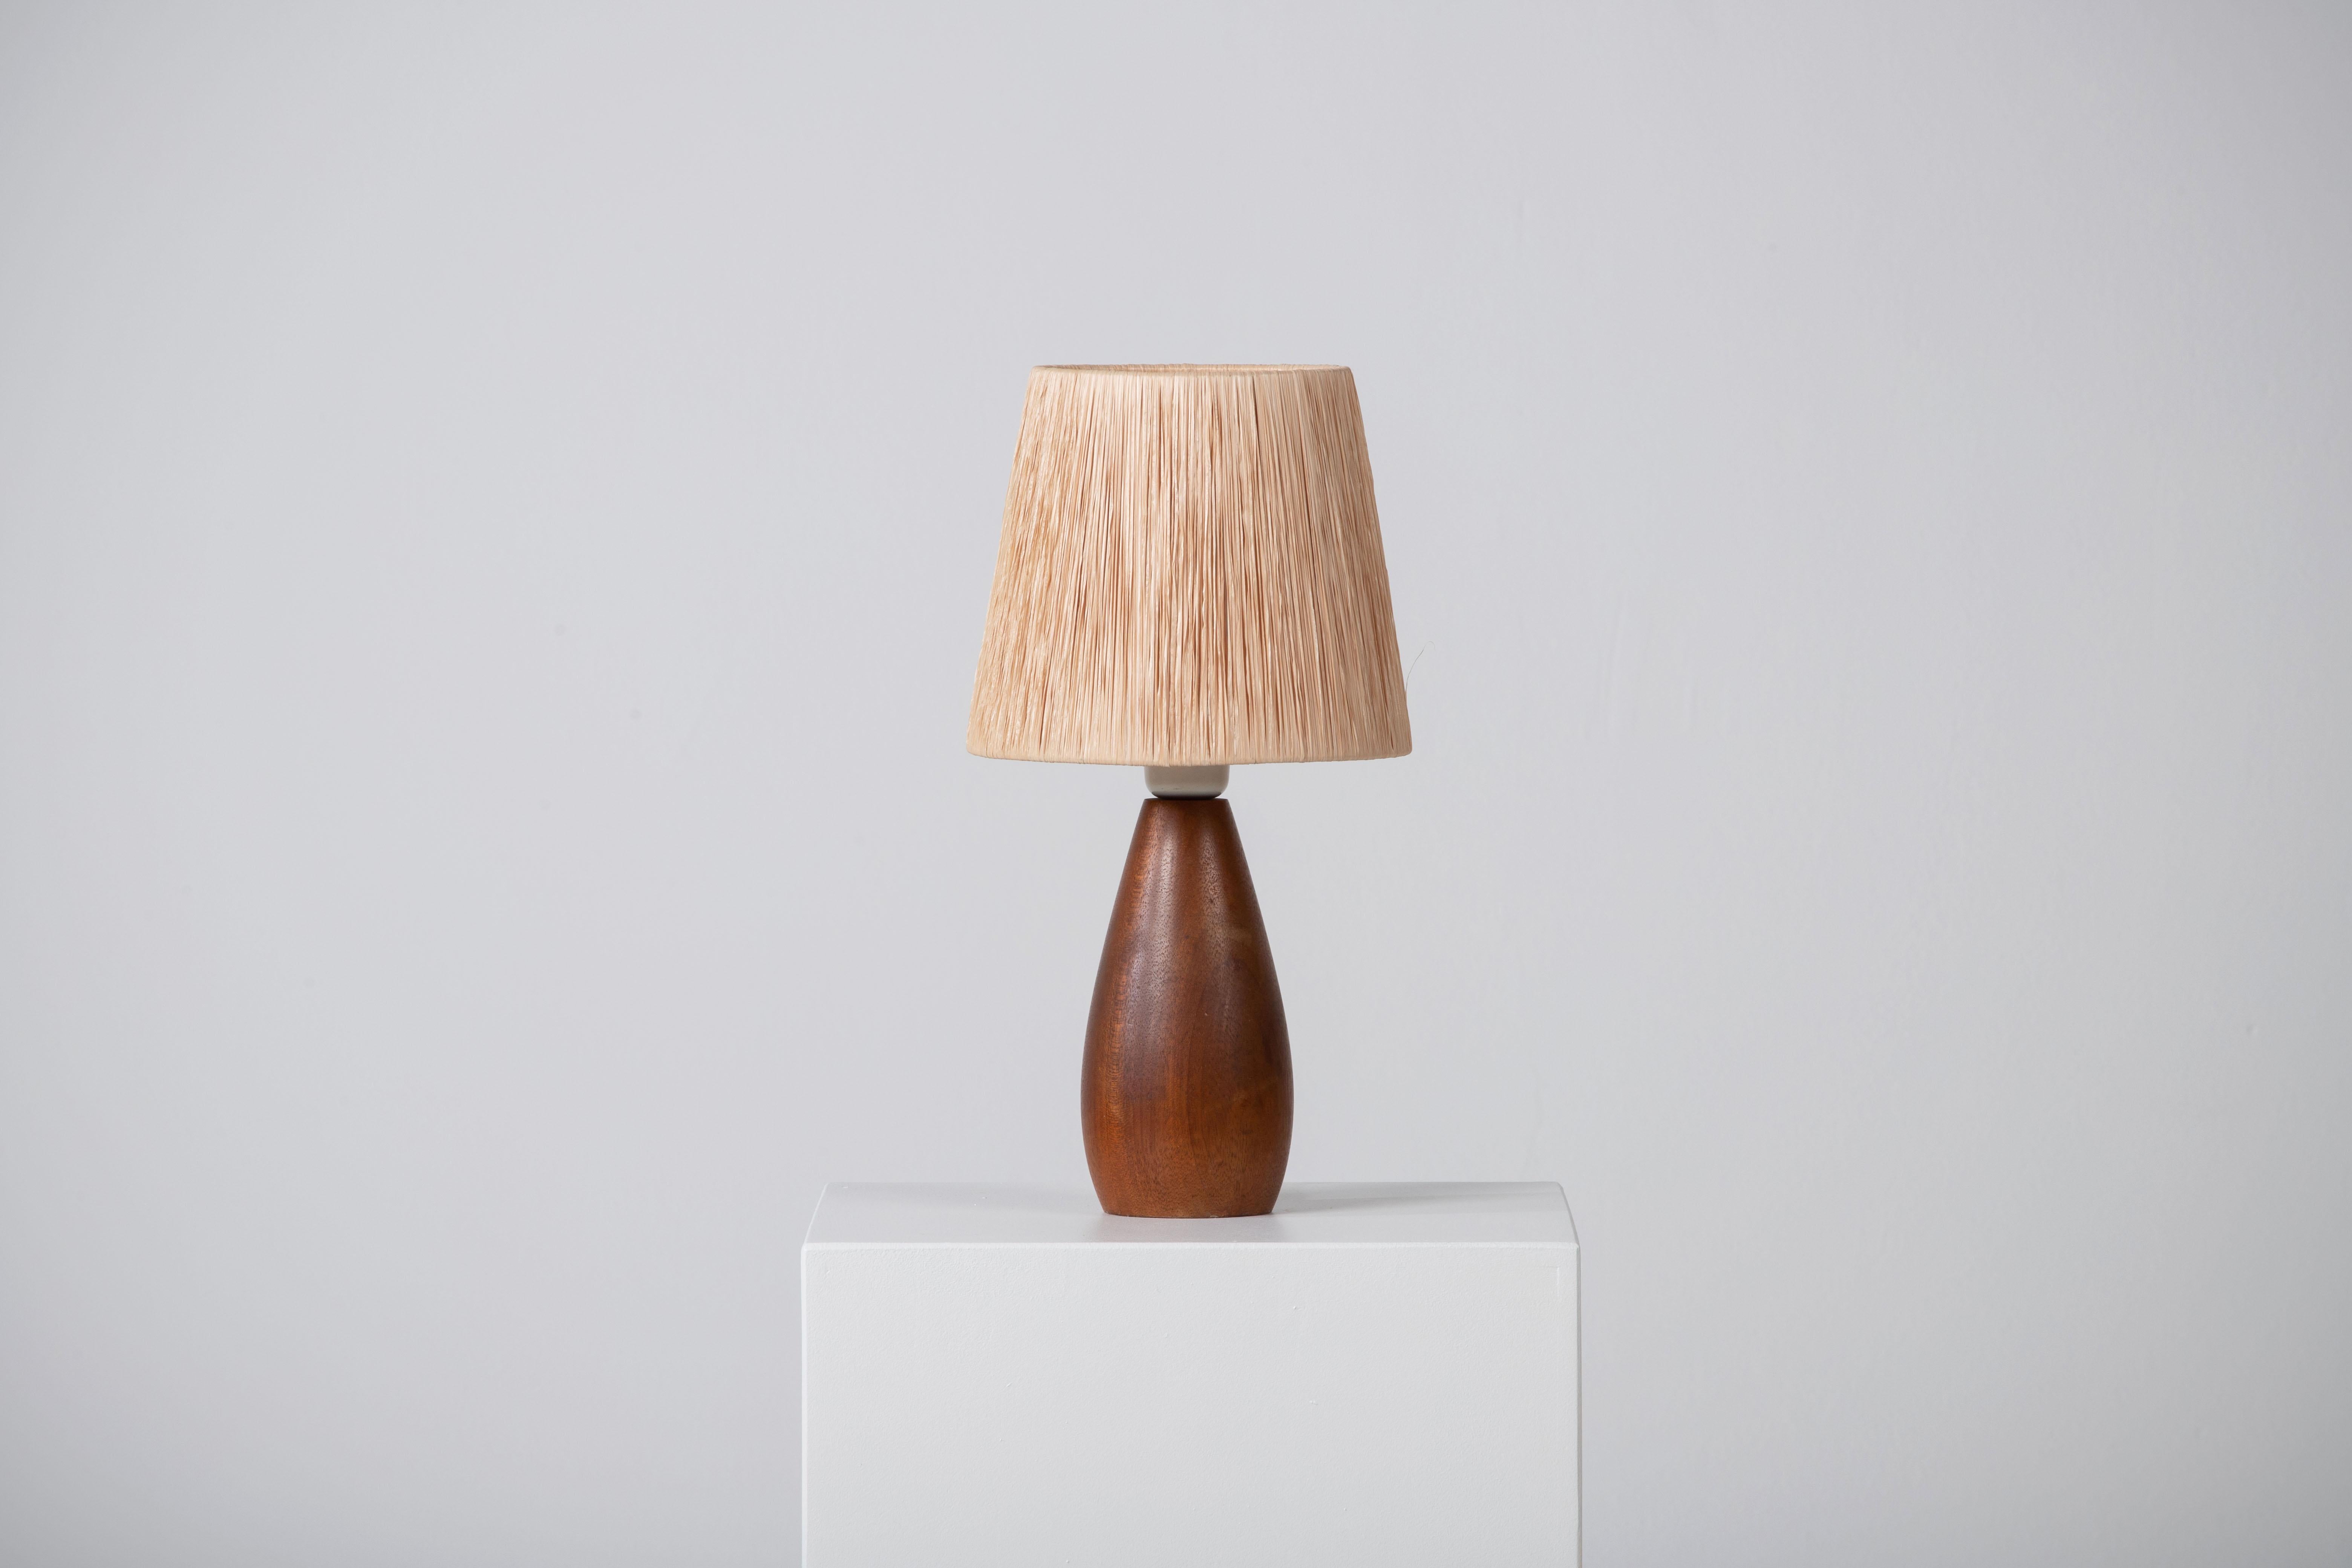 Teak table lamps, Sweden, 1960s
It is in good general condition and works perfectly. The lamp offers a warm atmosphere.

Sold without lampshade, height to the socket : 24 cm.